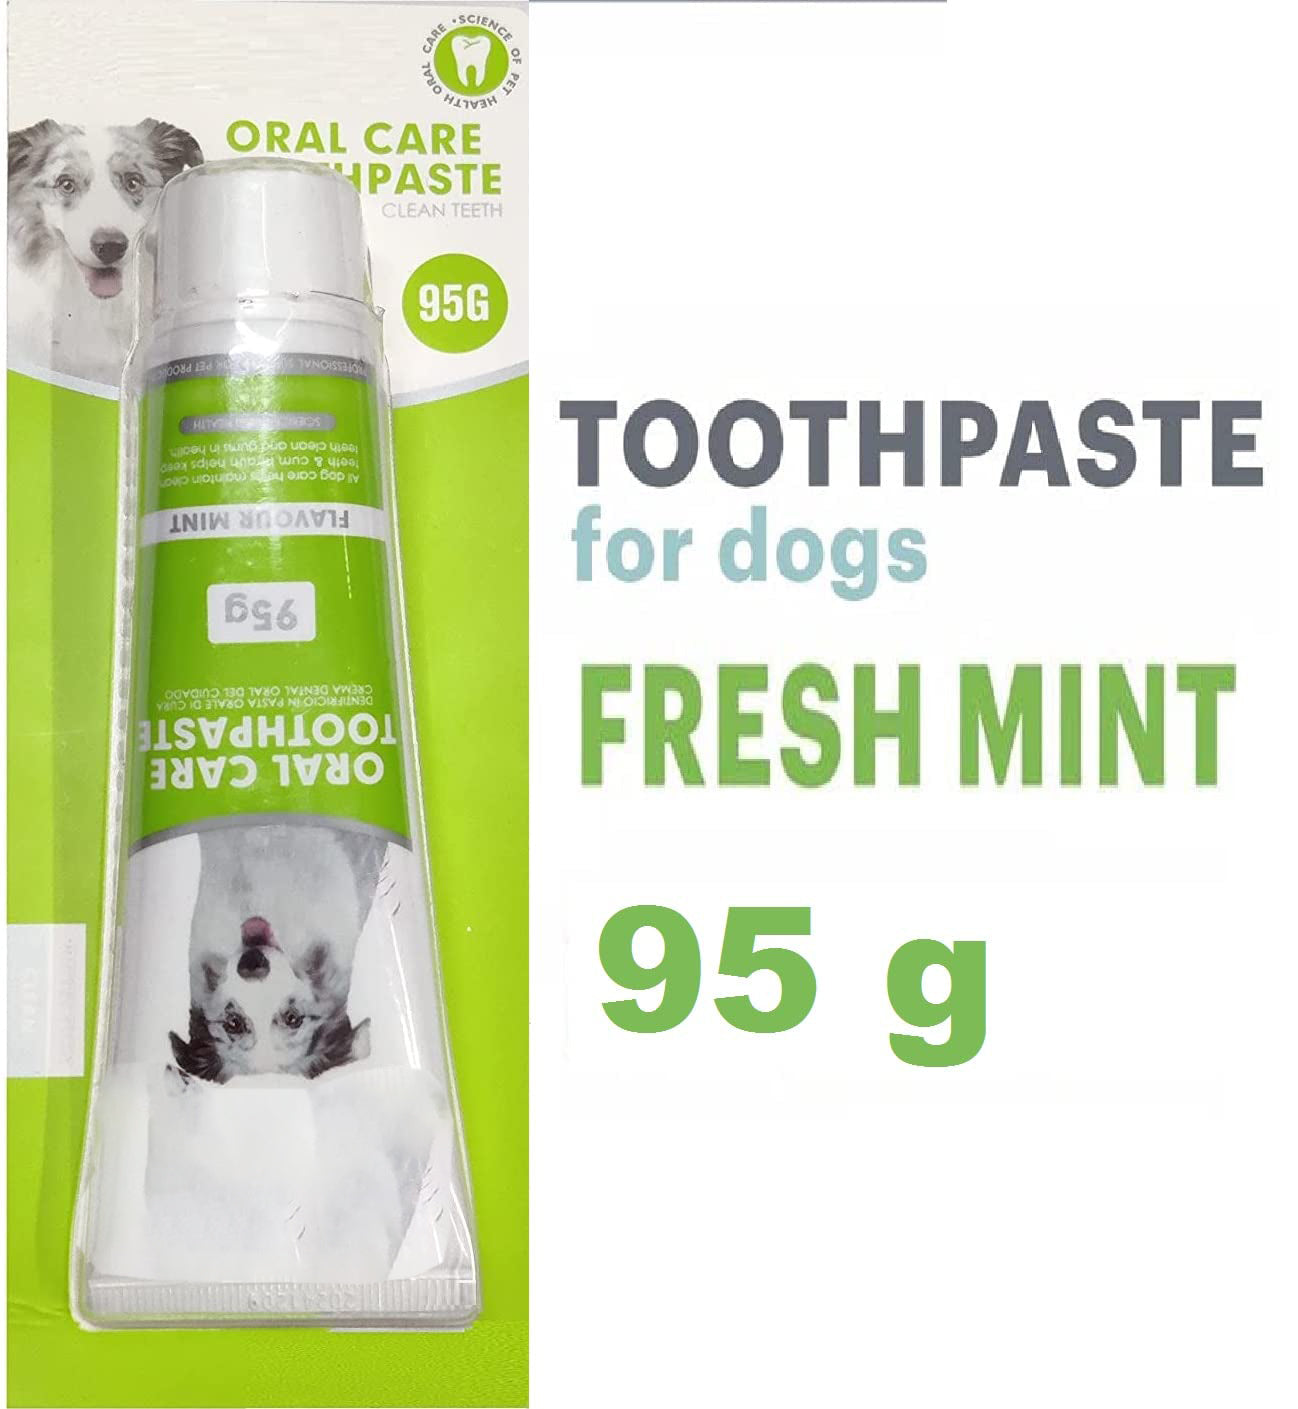 Nunbell Pet Oral Care Toothpaste - Clean Teeth Mint Flavor, 95g